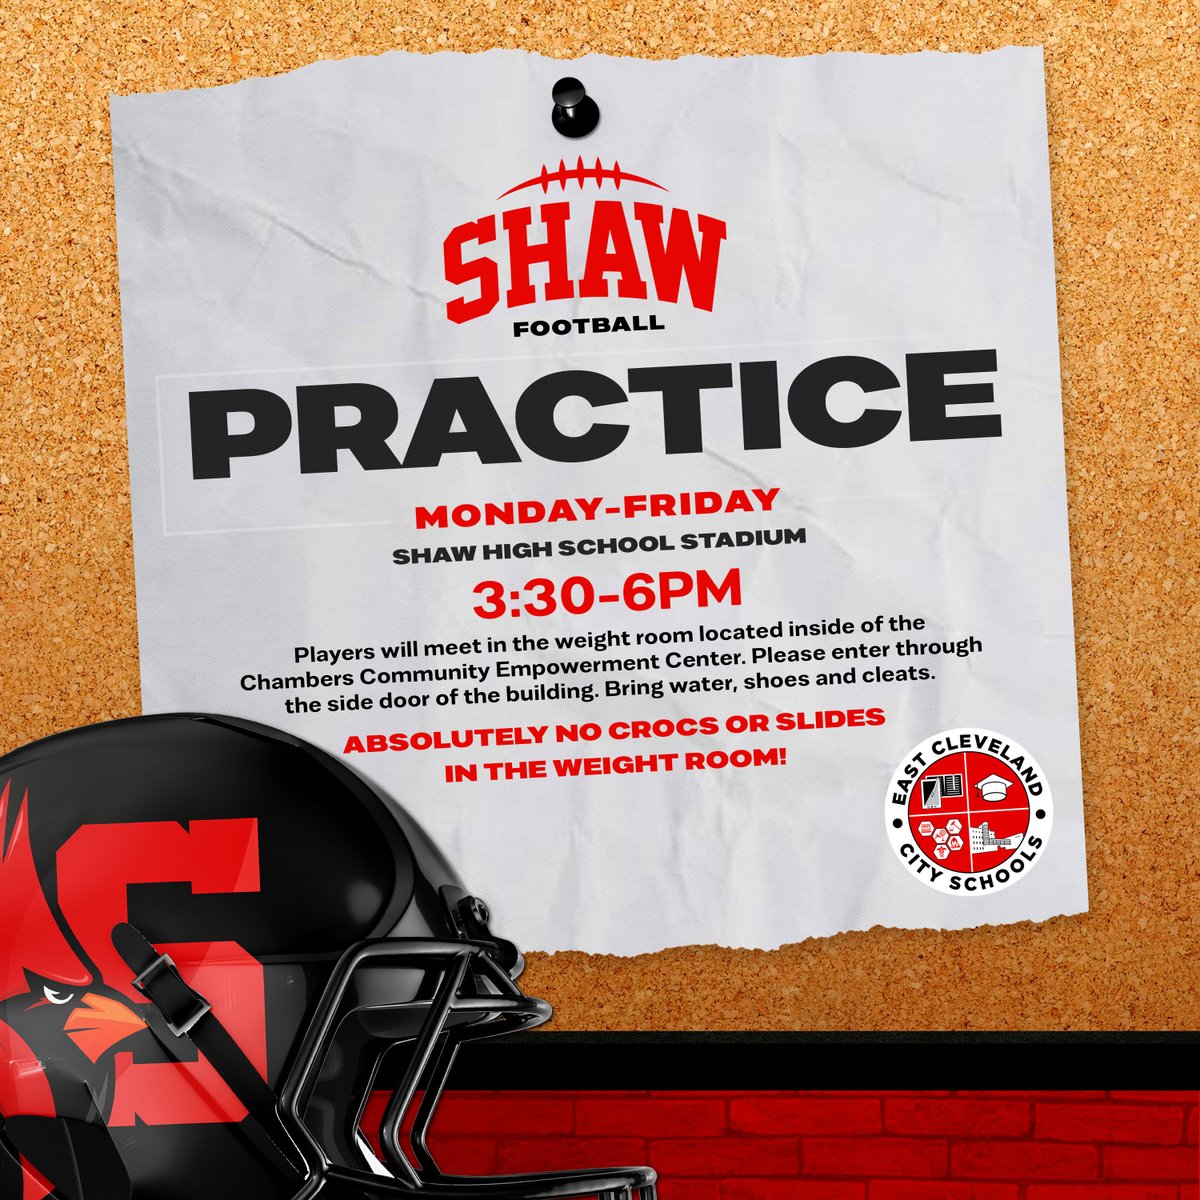 Shaw Football practice for all interested students begins TODAY at 3:30PM at Shaw Stadium. Players will meet in the weight room inside of the Chambers Community Empowerment Center. Bring water, shoes and cleats! Absolutely no Croc/Slides allowed in the weightroom! @shawcardinalfb